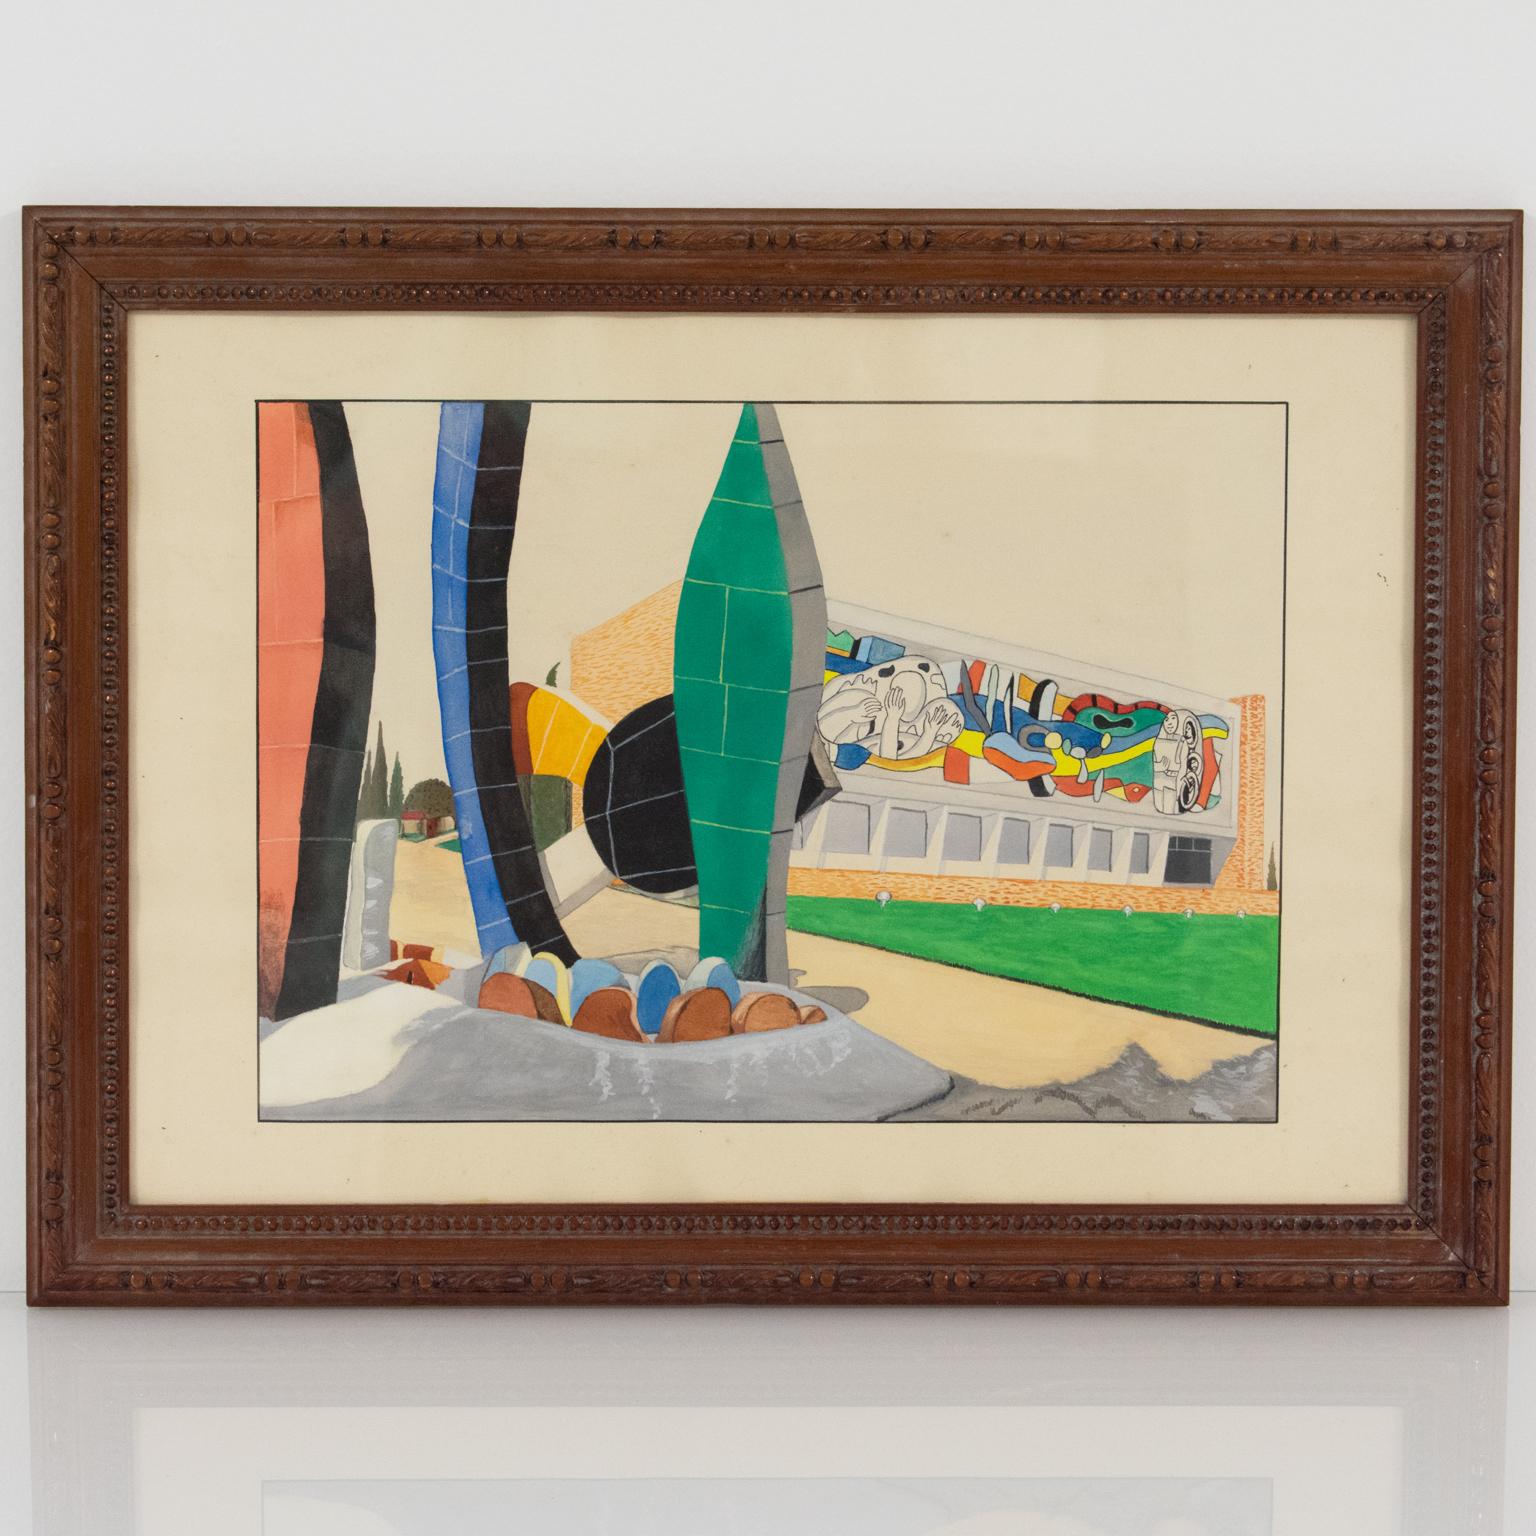 This gouache on paper features the Fernand Leger Museum in France with its unique large tile mosaic on the front of the building. There is no signature, only a gallery stamp at the back that read: P. Marquet - 25/27 rue de la Gare - Limoux, Aude.
It